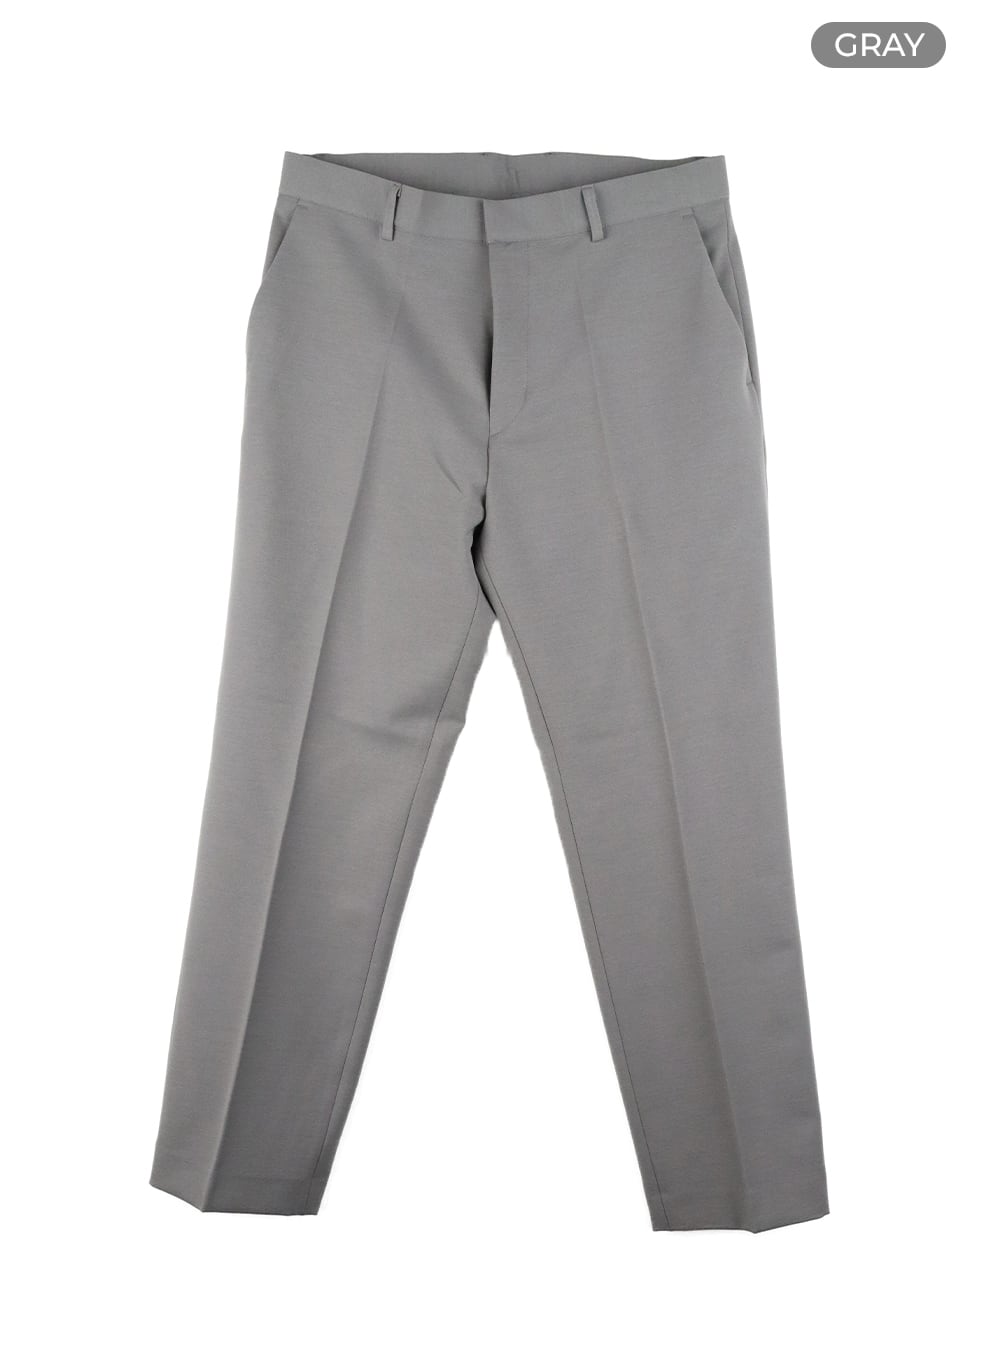 mens-cropped-tailored-pants-ia402 / Gray